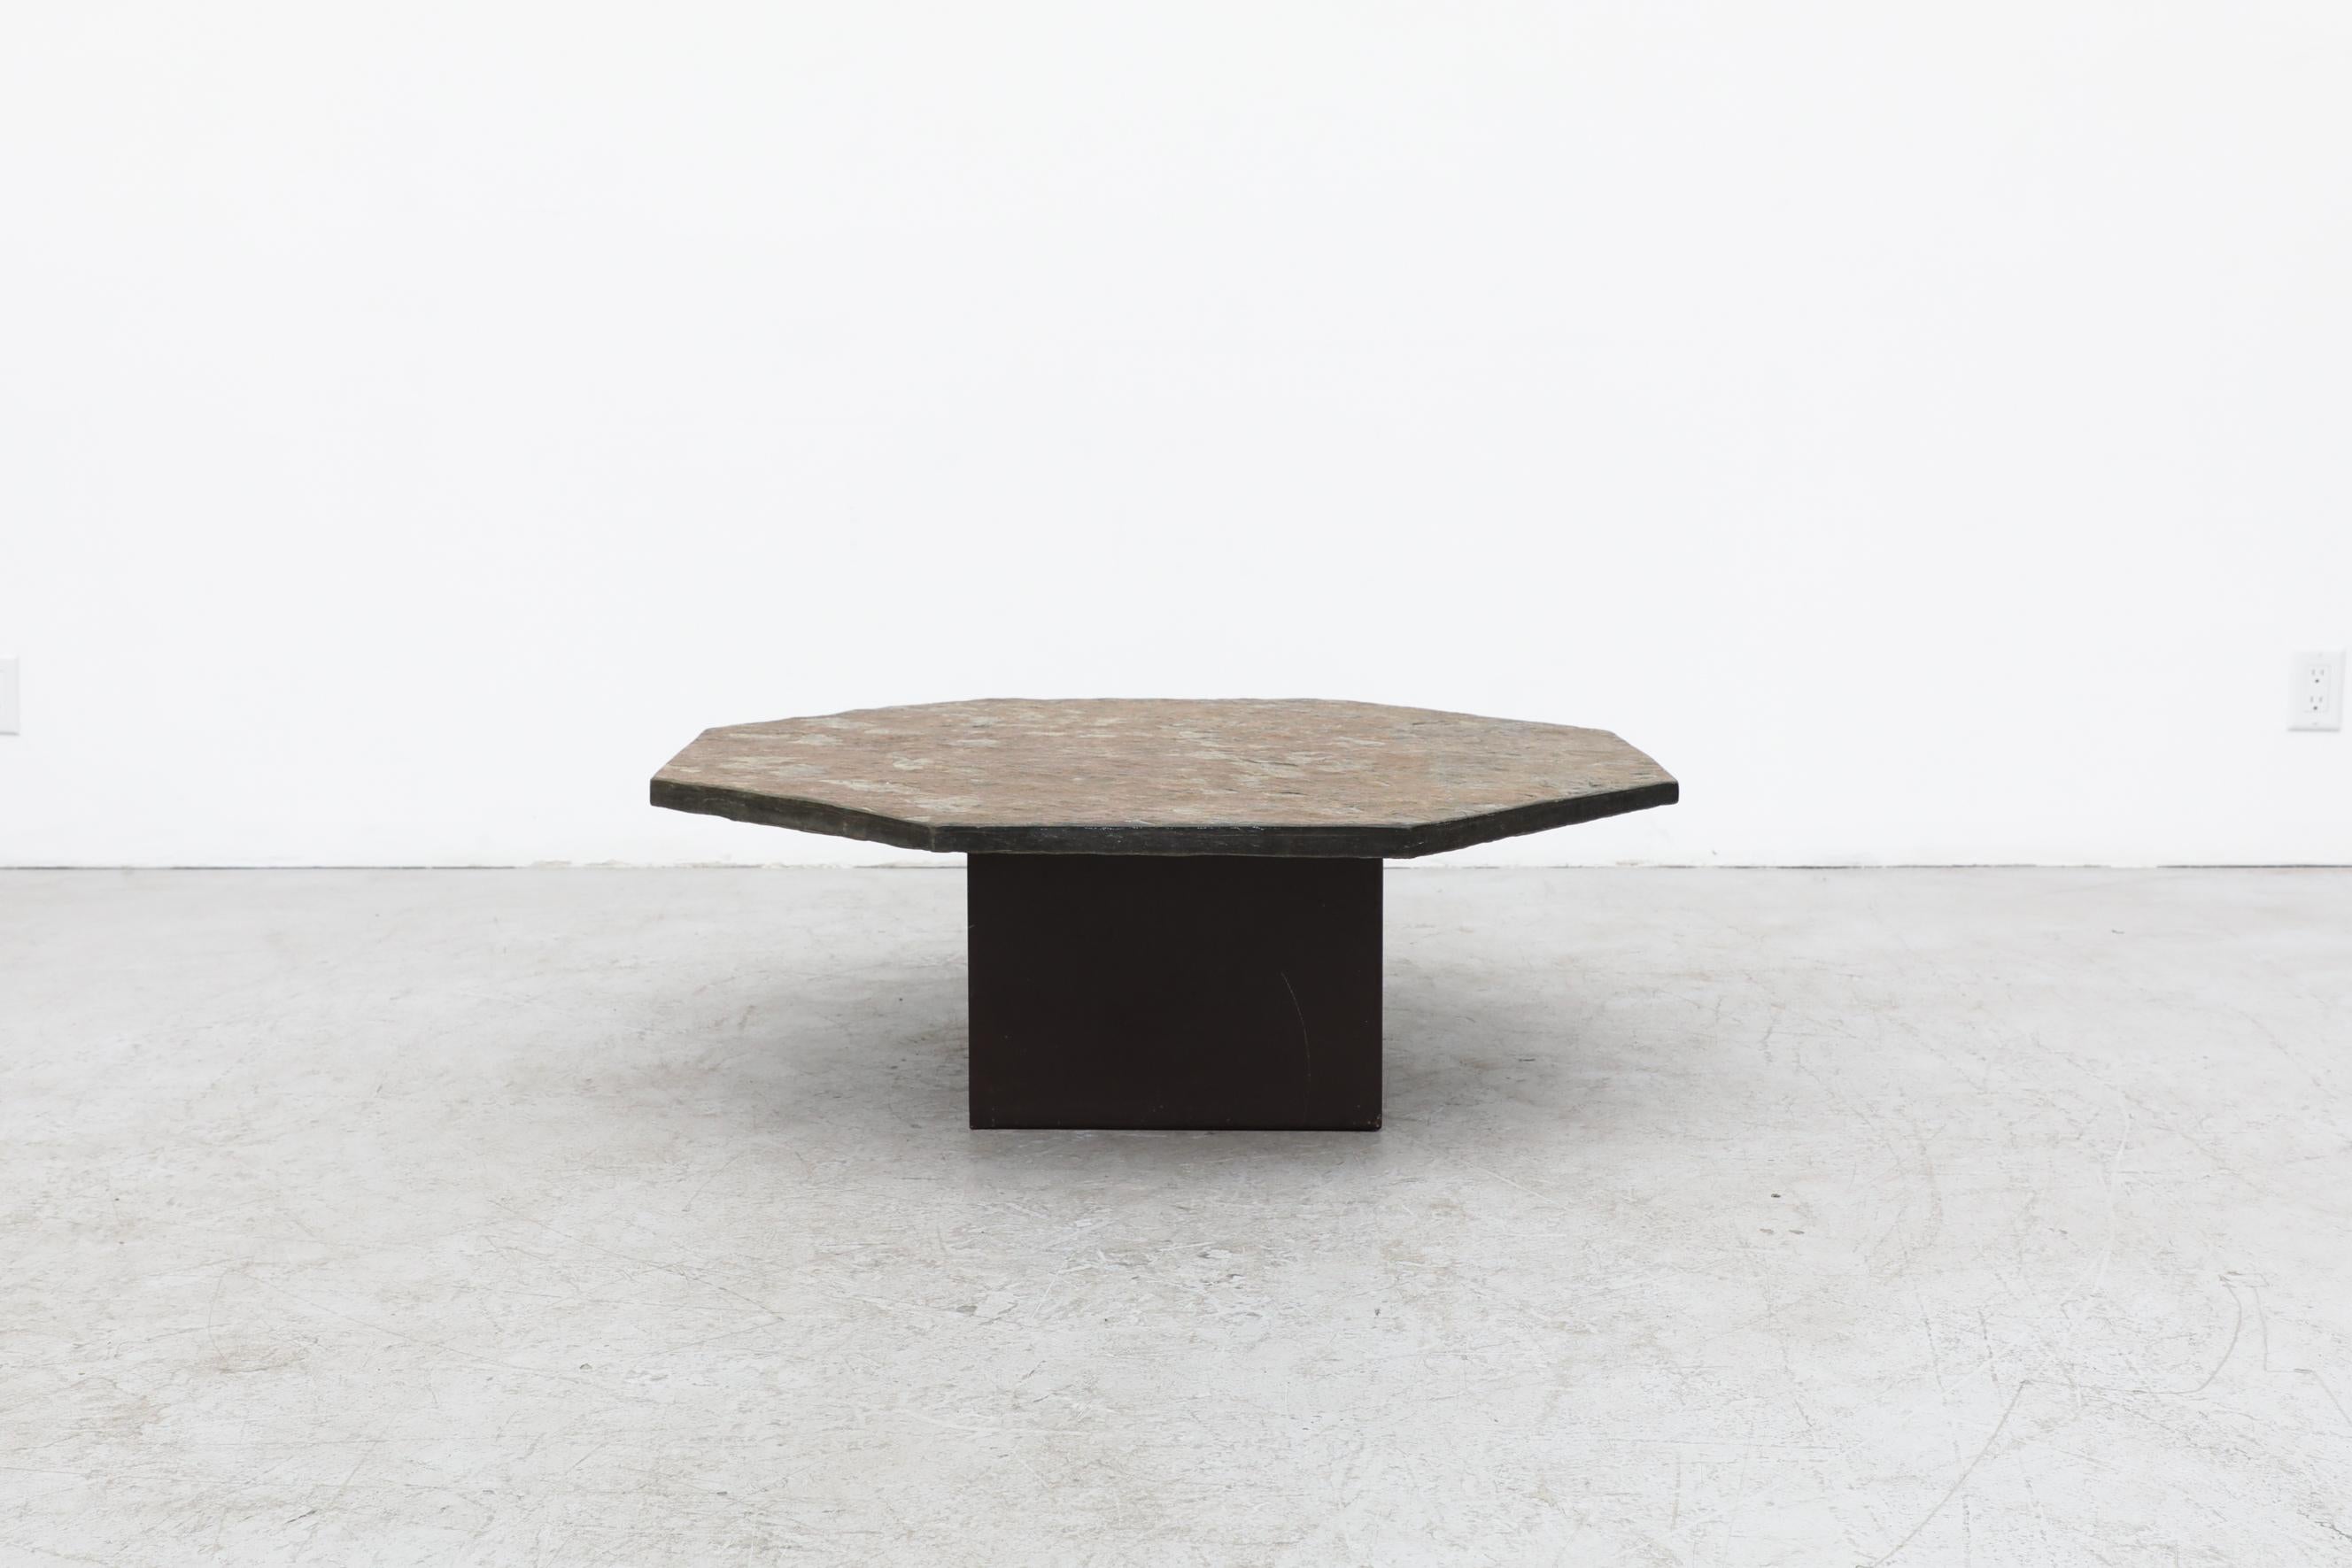 Brutalist, handsome, octagonal stone topped side or coffee table with an enameled metal pedestal base. In original condition with visible patina and wear consistent with its age and use.